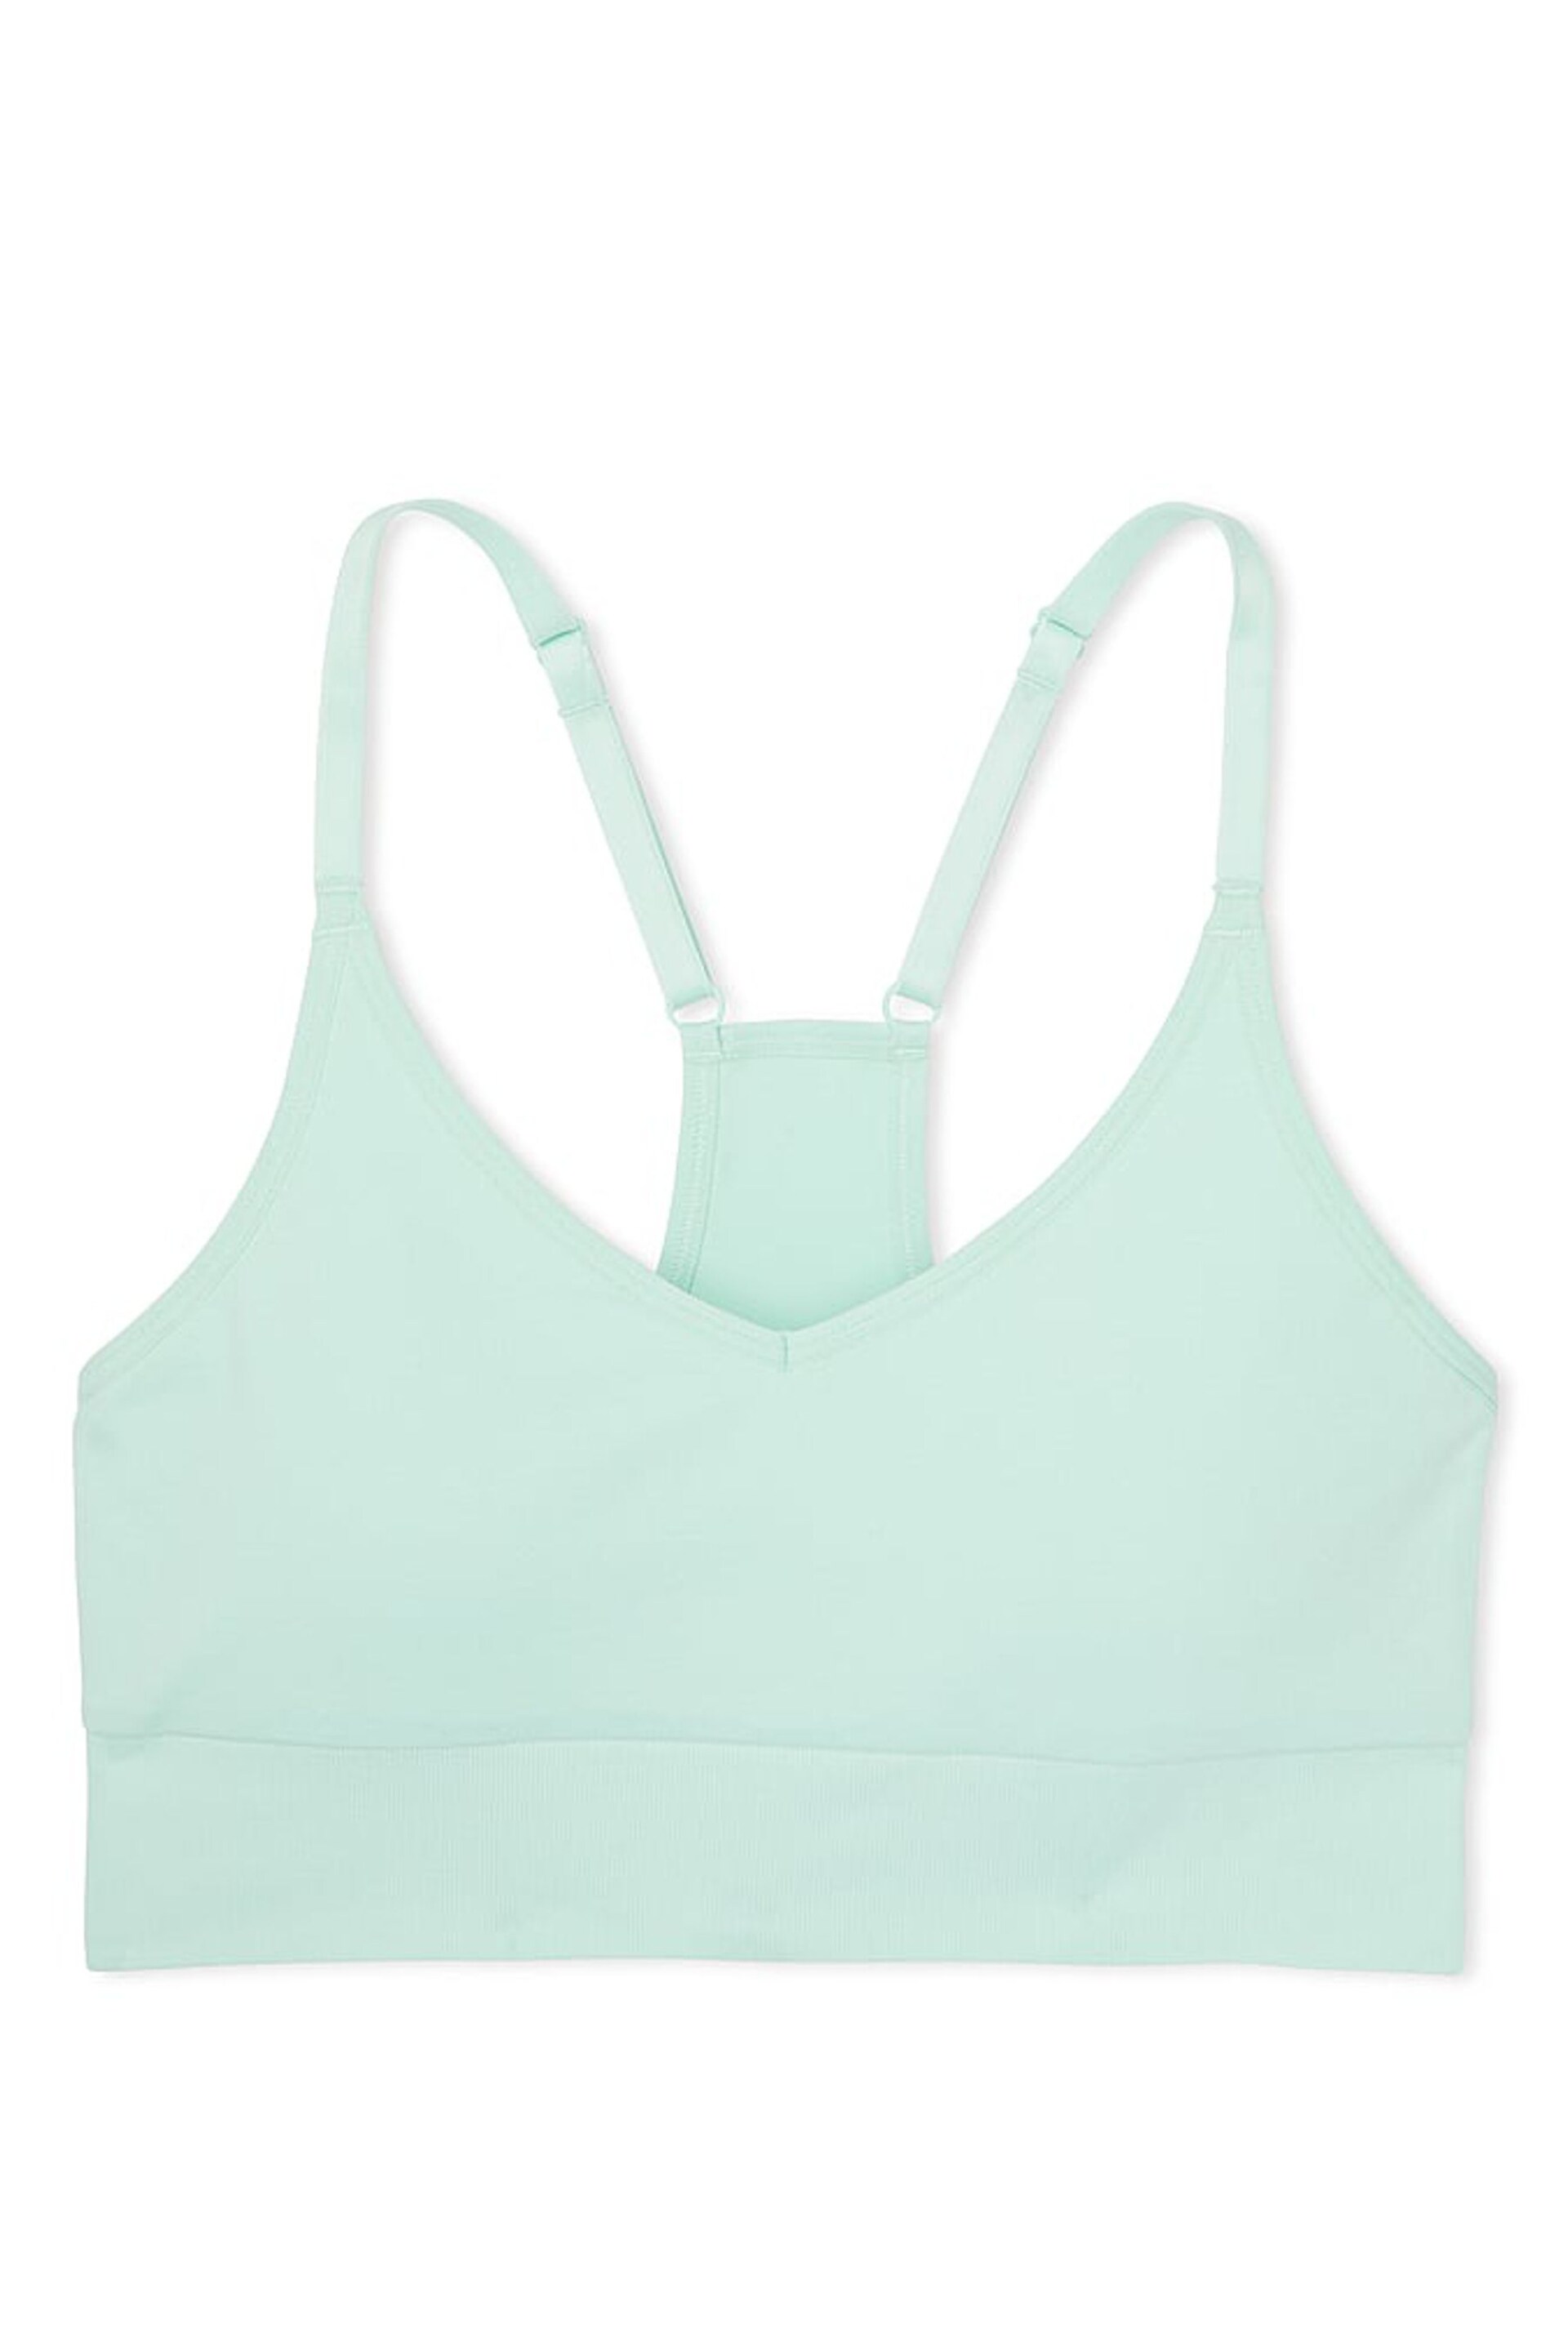 Victoria's Secret PINK Opal Blue Non Wired Lightly Lined Seamless Sports Bra - Image 4 of 4